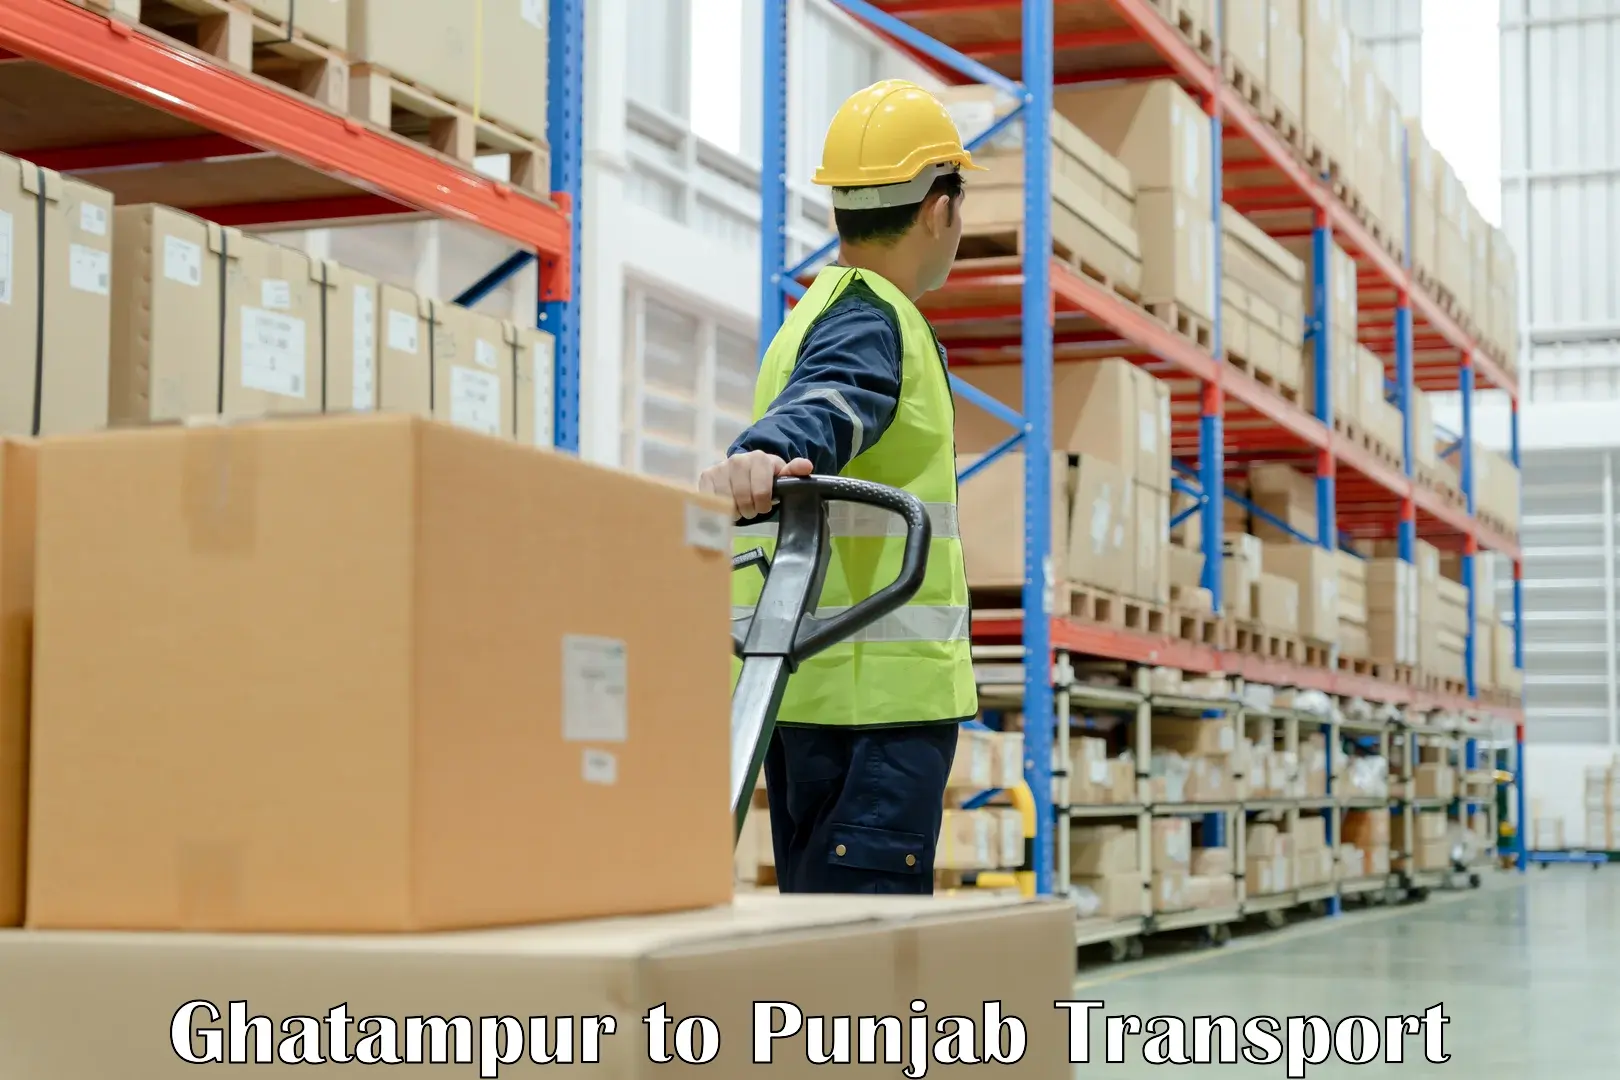 Daily parcel service transport in Ghatampur to Patiala